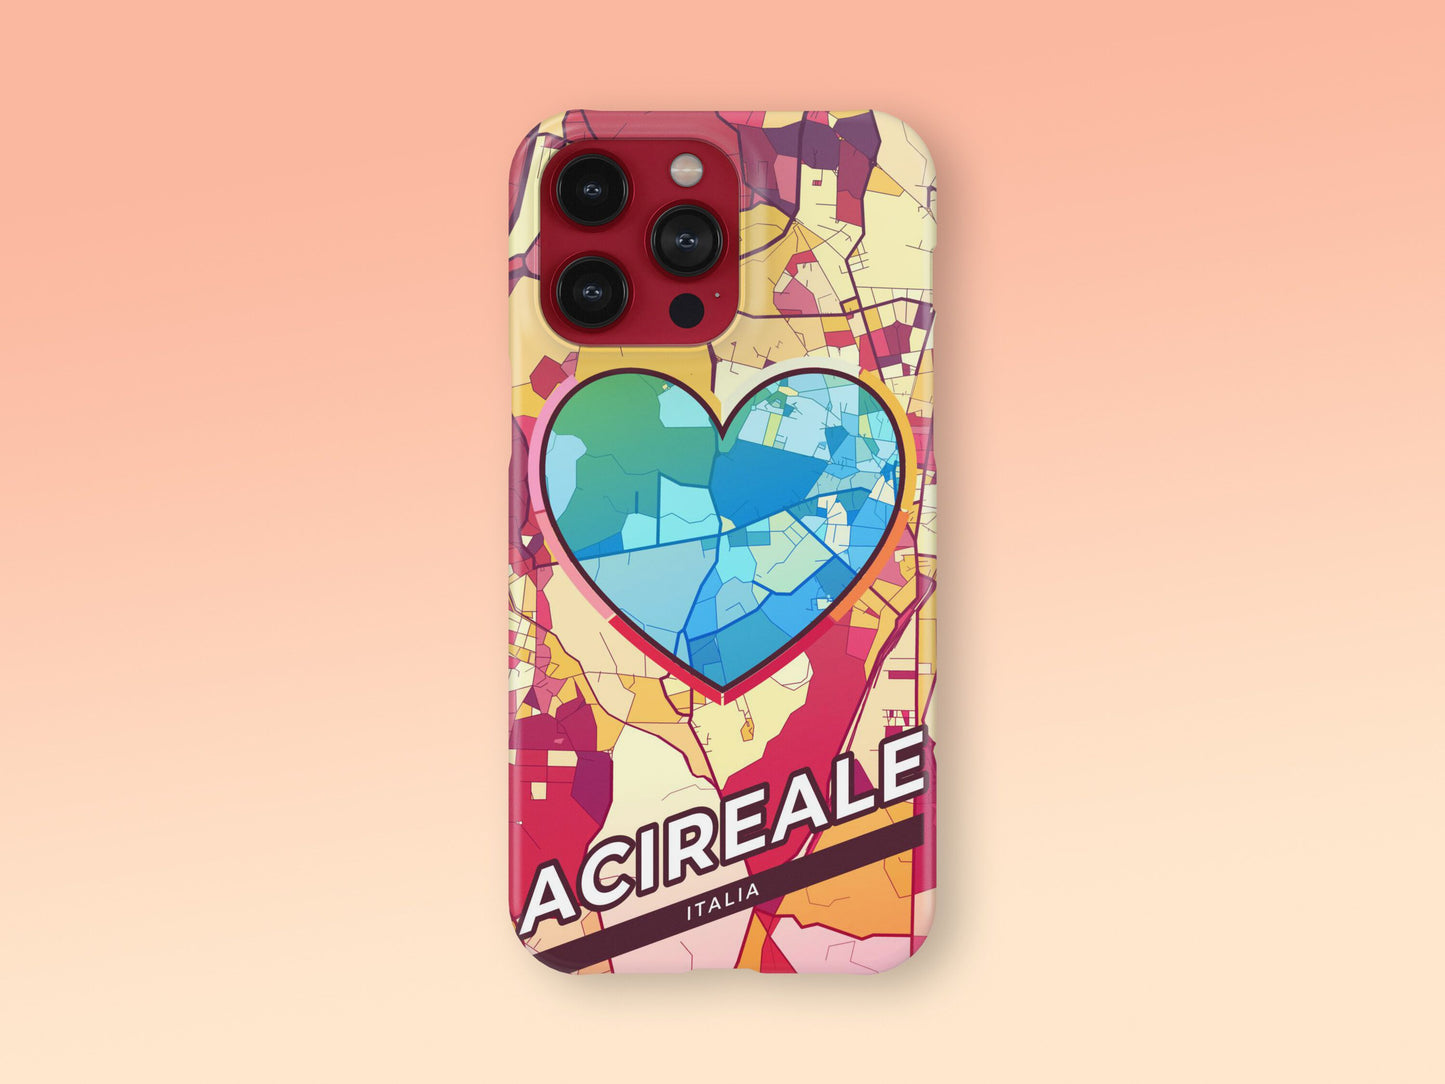 Acireale Italy slim phone case with colorful icon. Birthday, wedding or housewarming gift. Couple match cases. 2